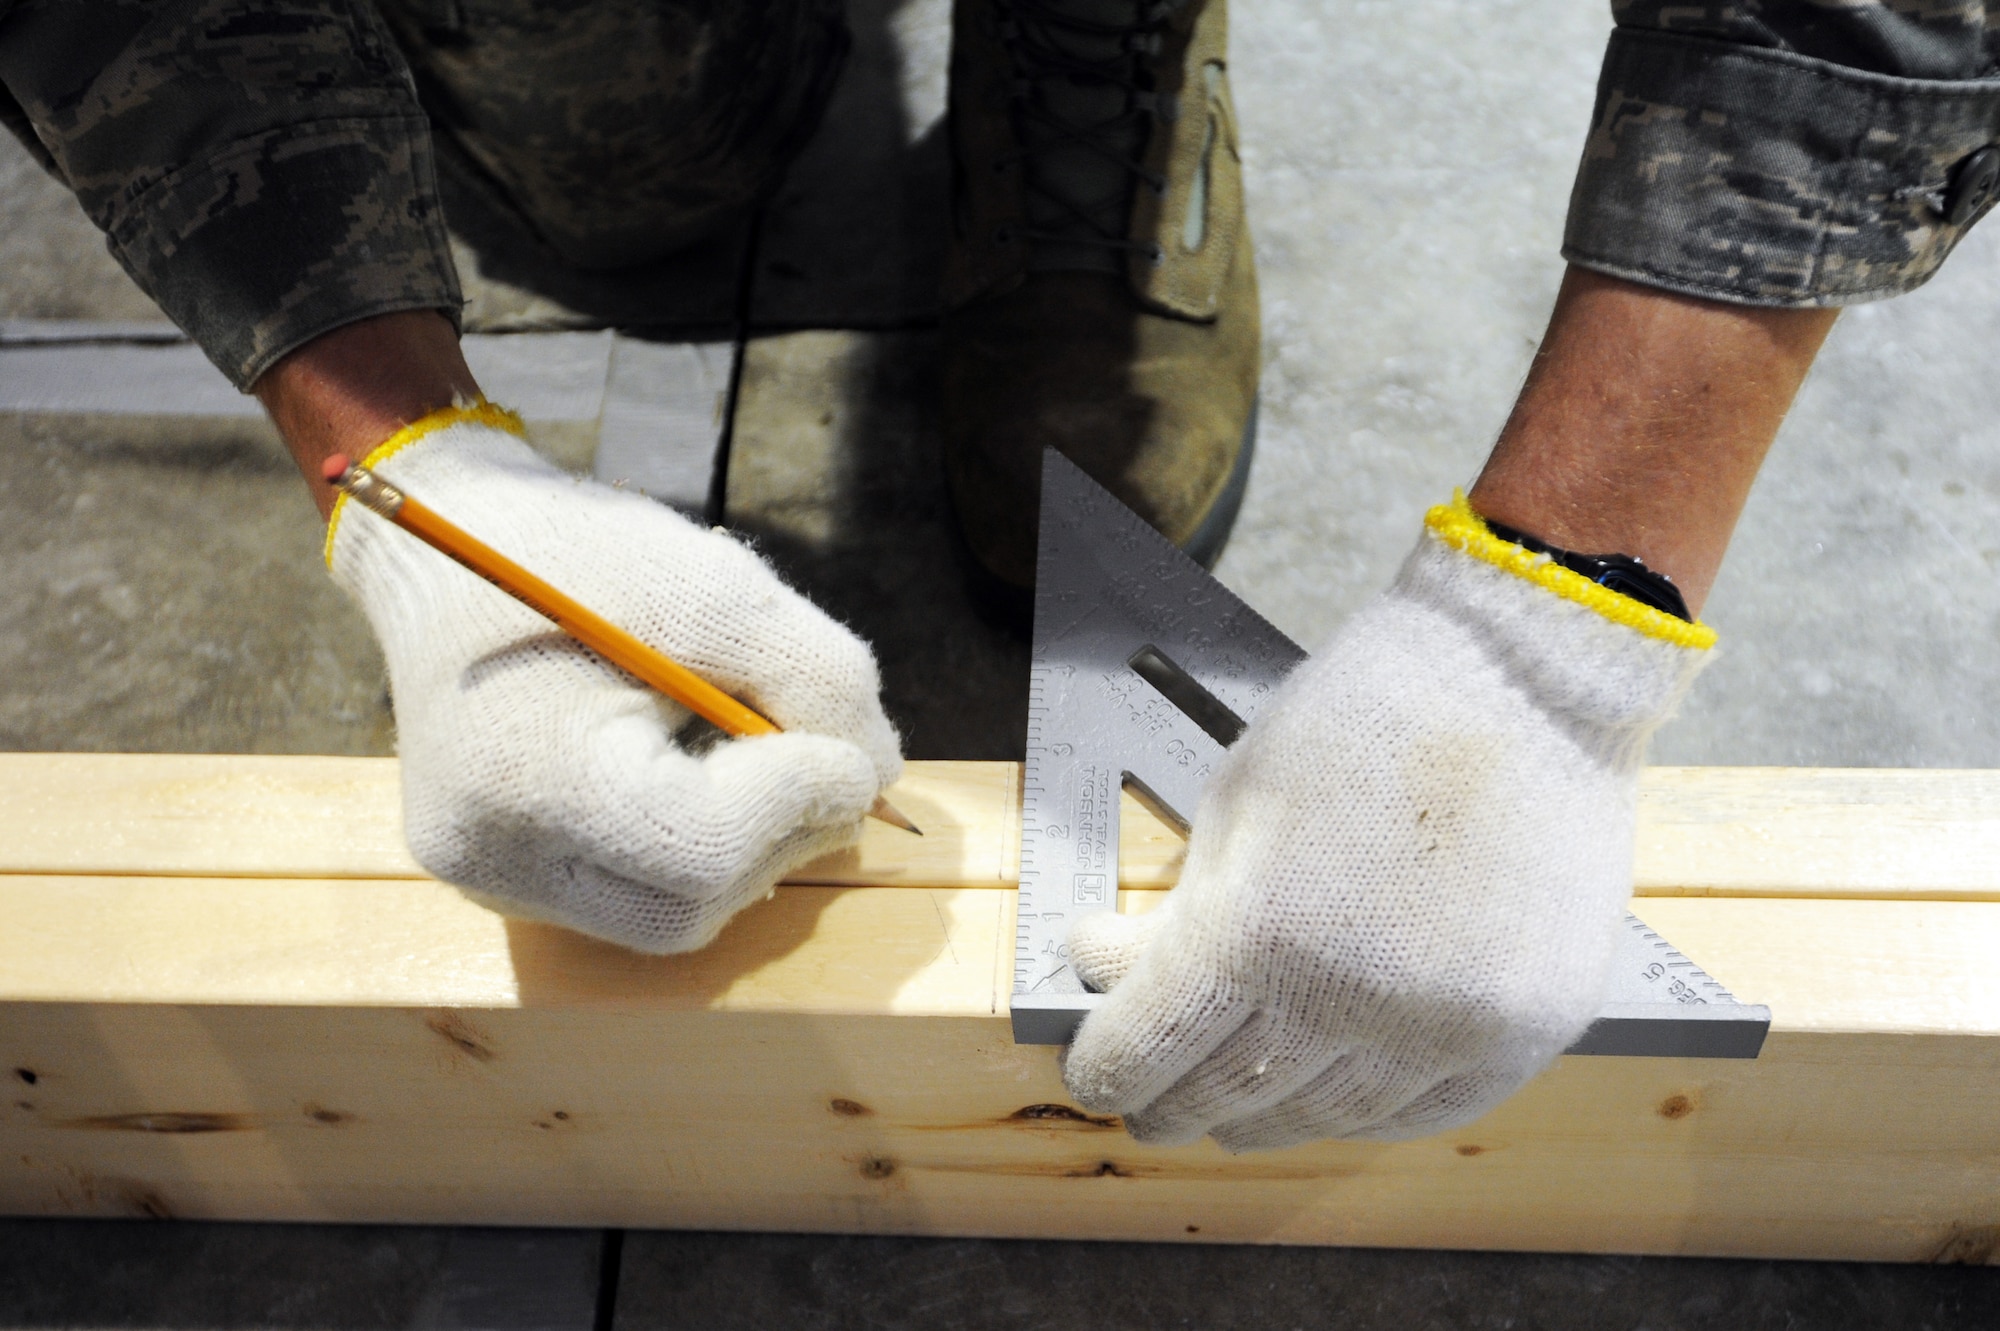 MISAWA AIR BASE, Japan -- Airman 1st Class Derek Wagner, 35th Civil Engineer Squadron structural apprentice, marks lumber in Building 1366 here, Feb. 8. The lumber will be cut and used for building renovations on the new location for a stray animal temporary care facility. PAWS is a private organization here that will operate the new facility. (U.S. Air Force photo/Airman 1st Class Kia Atkins)